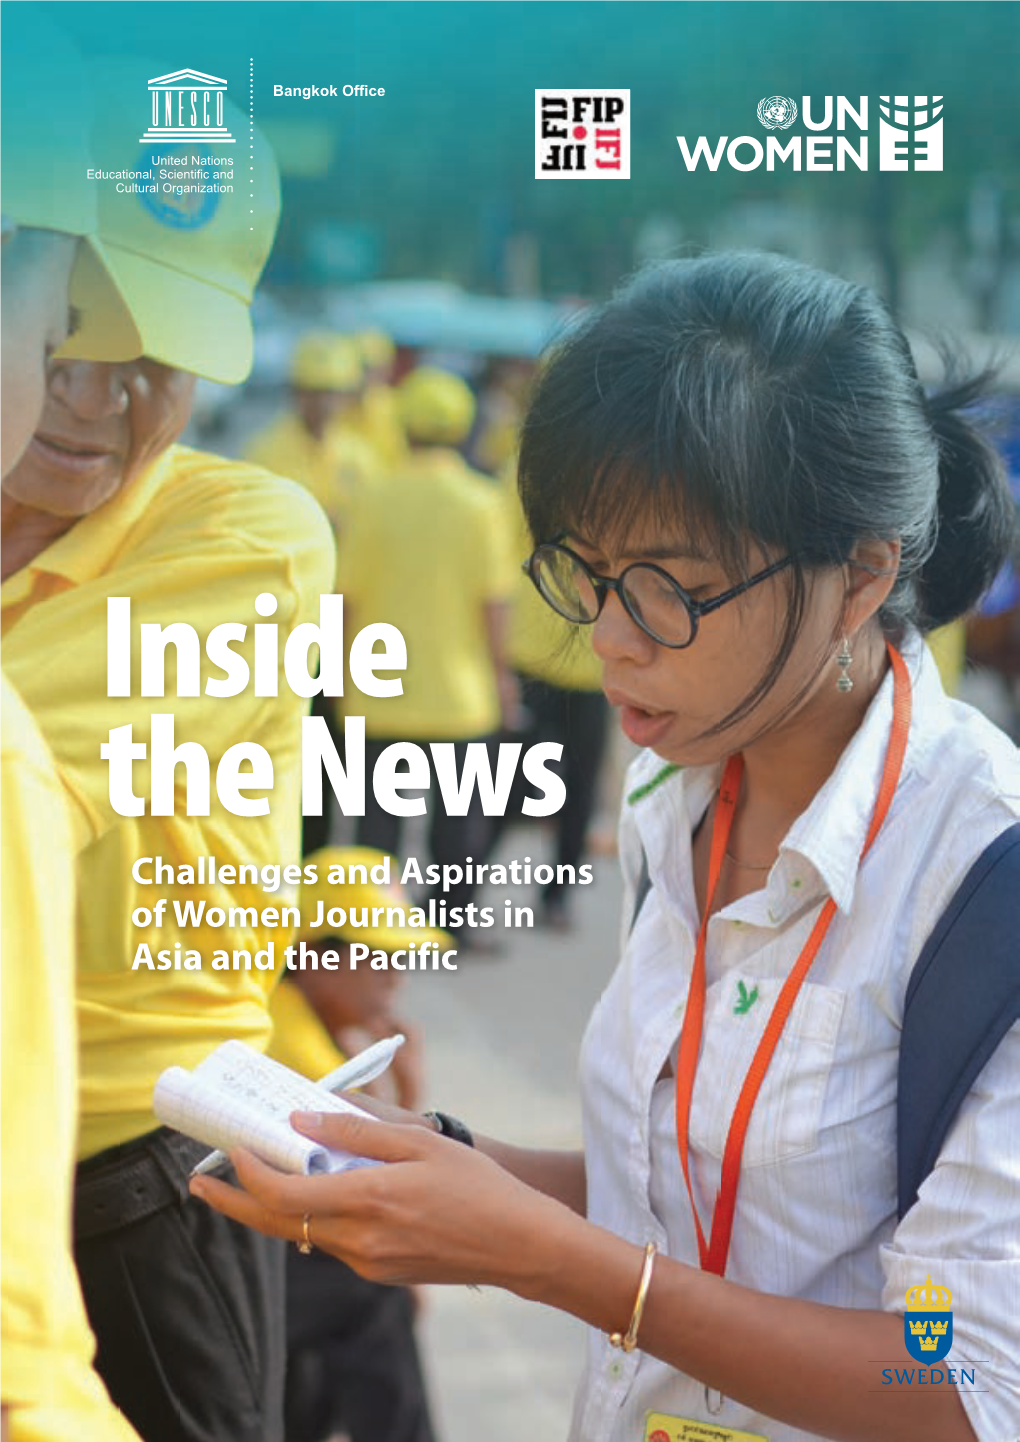 Challenges and Aspirations of Women Journalists in Asia and the Pacific II III